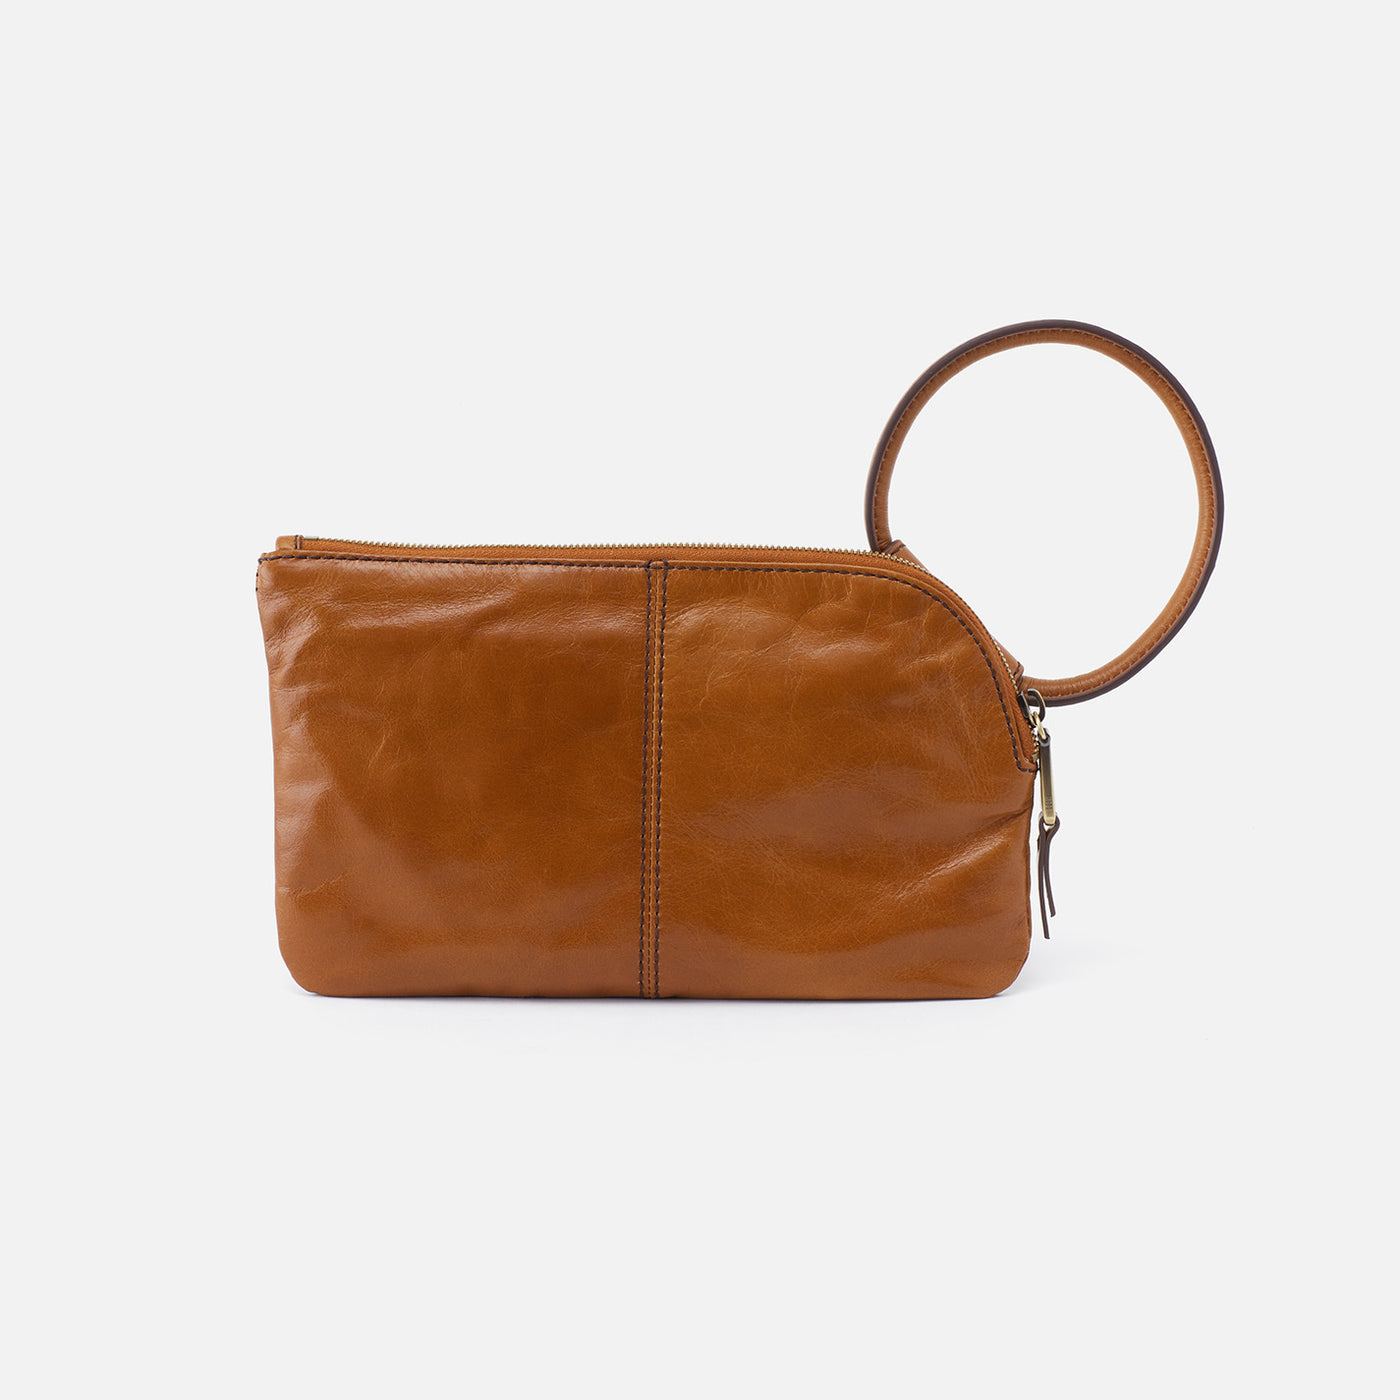 Sable Wristlet in Polished Leather - Truffle